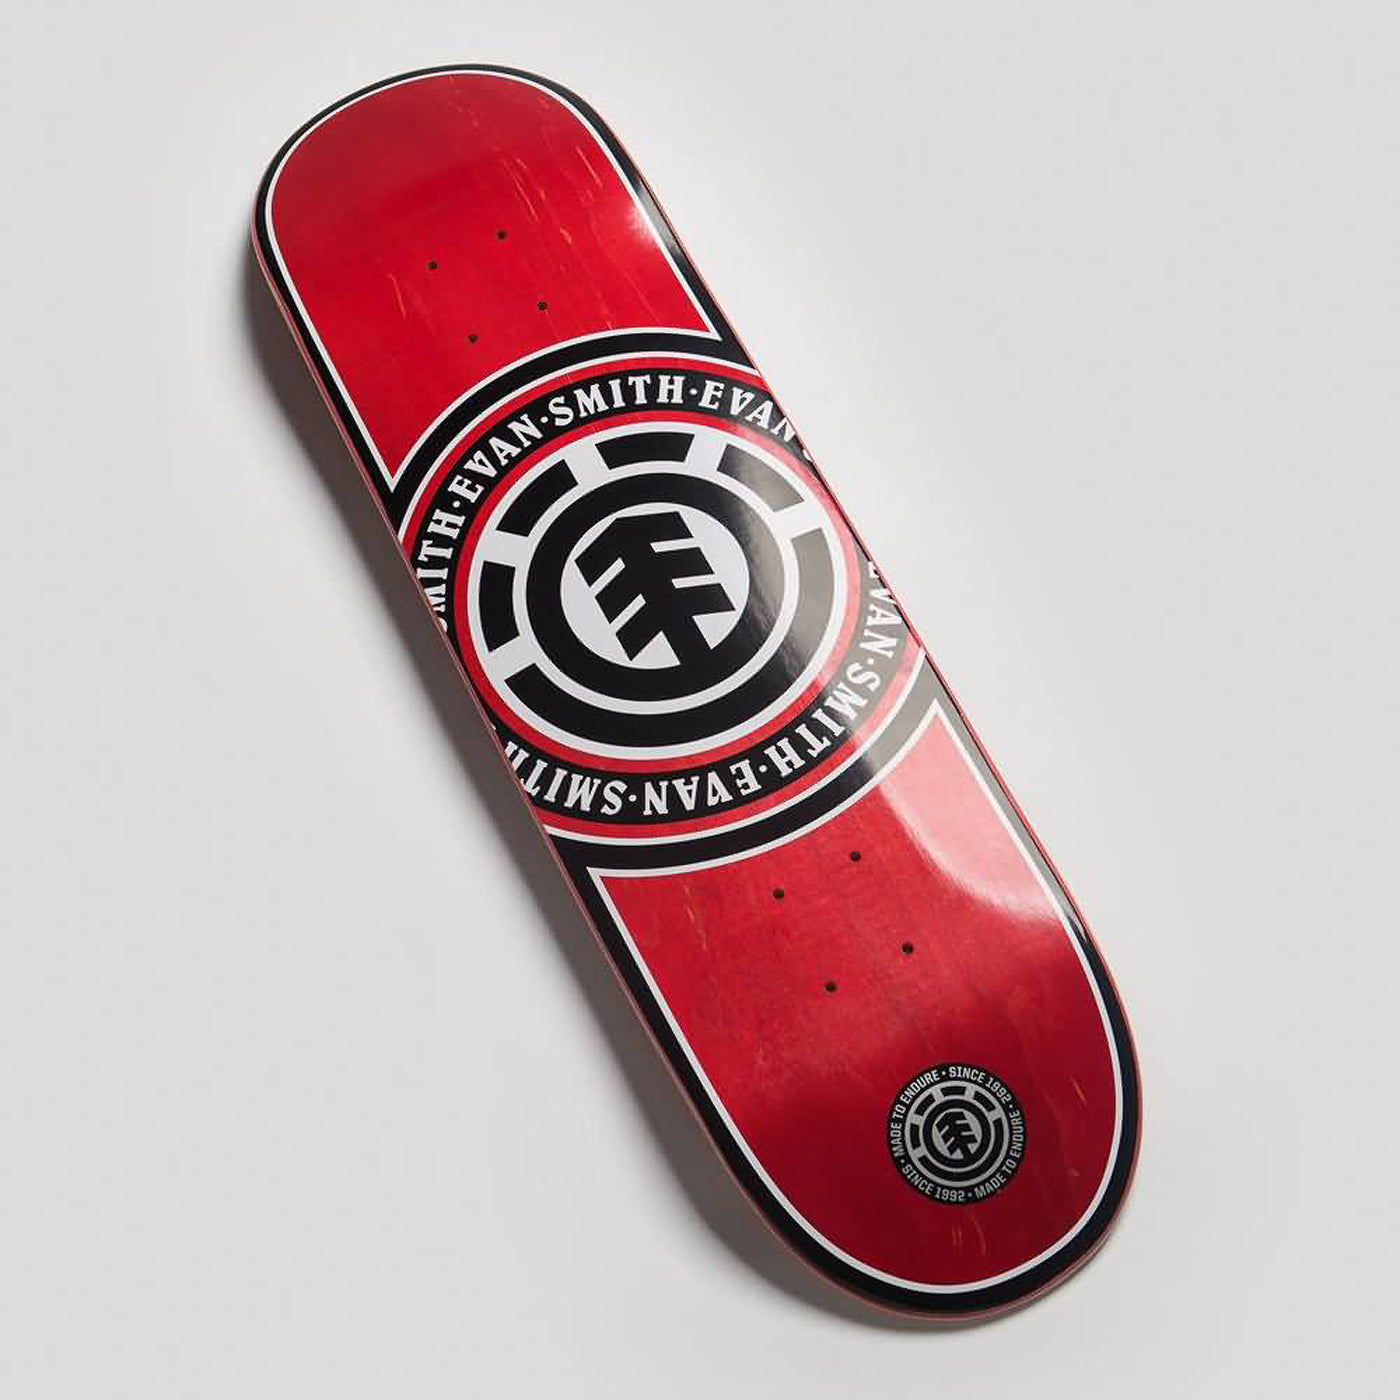 Introducing the Element 25 Year Anniversary Skateboard Deck Collection